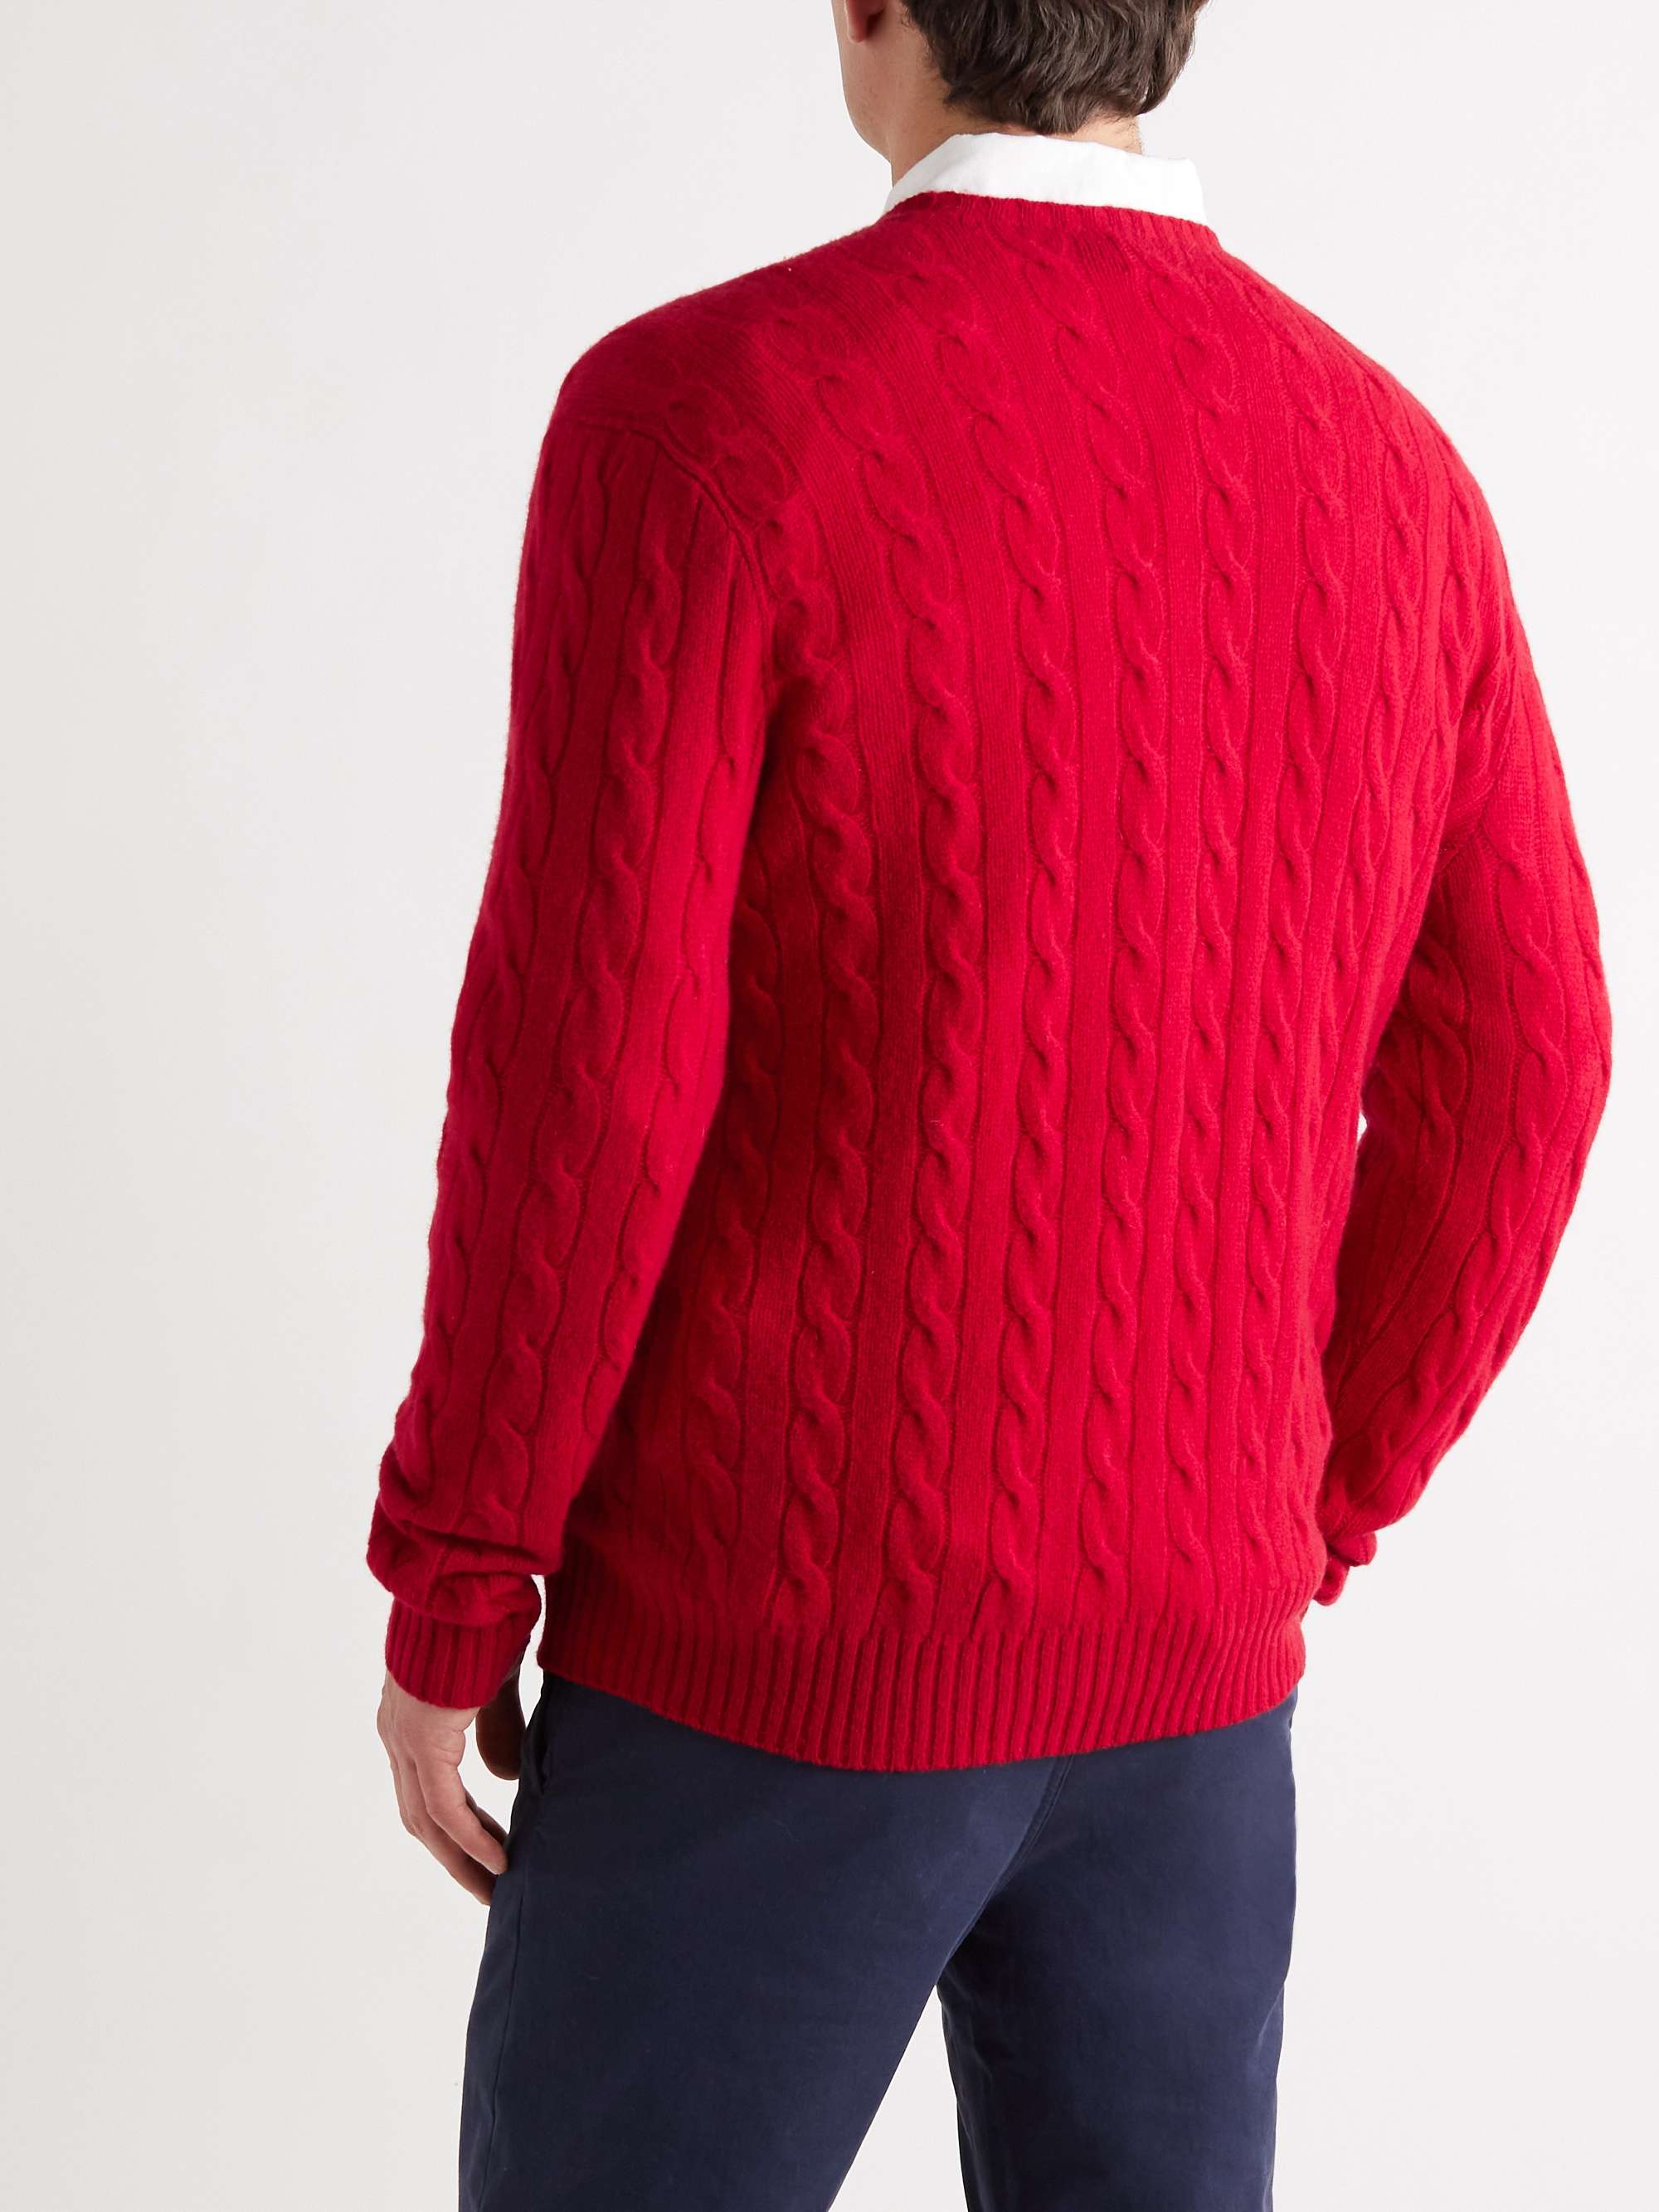 POLO RALPH LAUREN Cable-Knit Wool and Cashmere-Blend Sweater